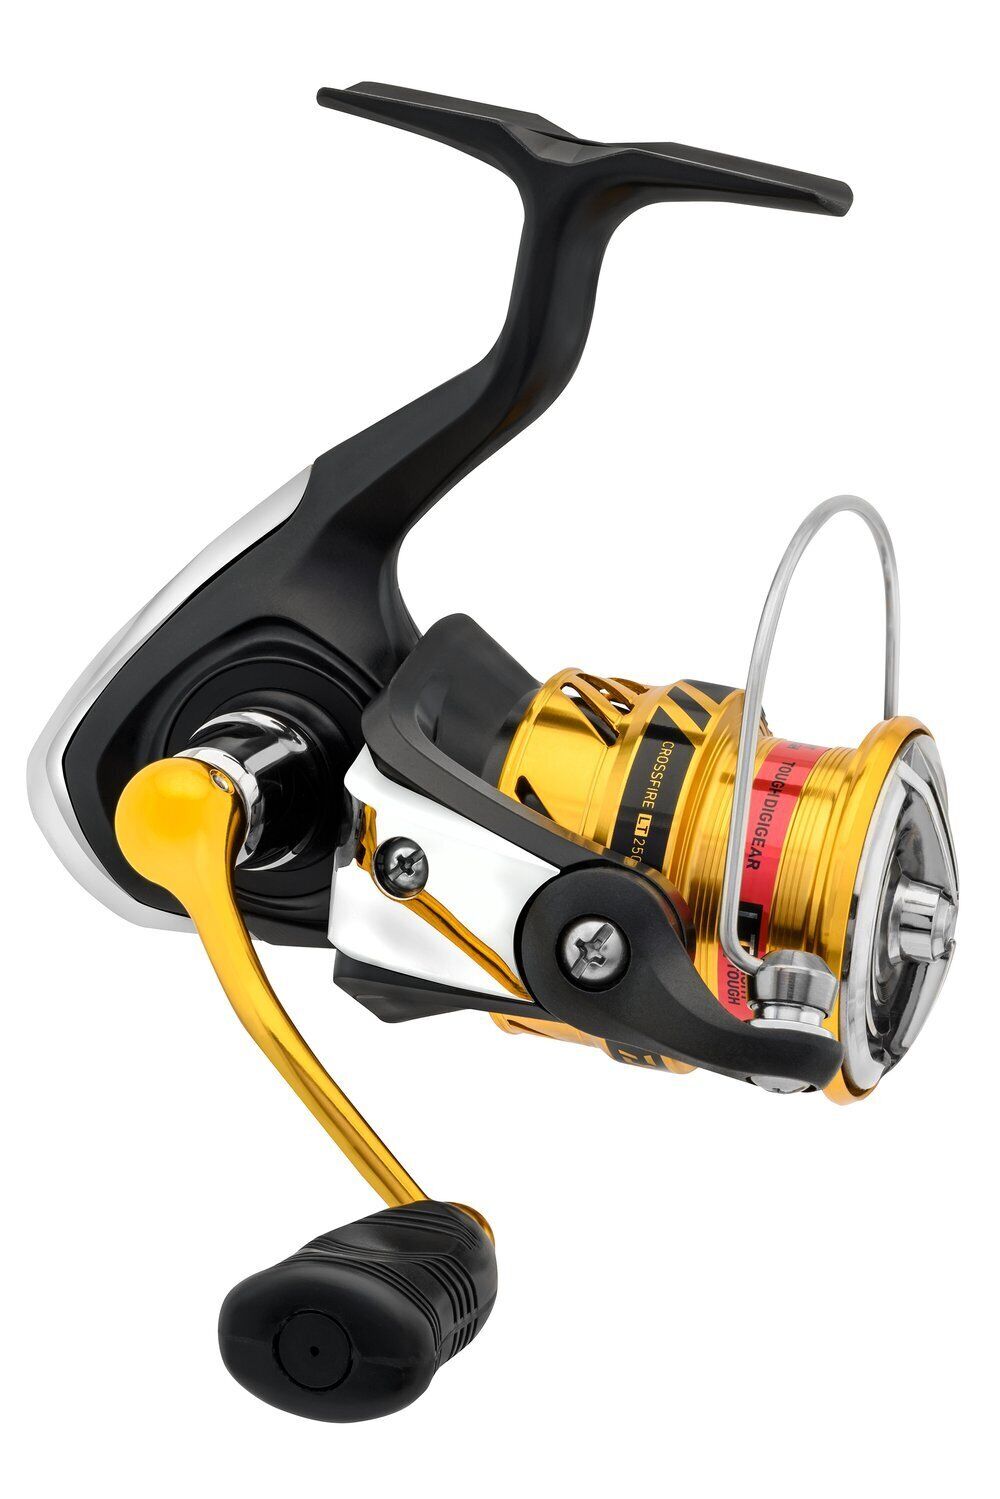 Daiwa Crossfire LT Spin Reel - 3000 - Mansfield Hunting & Fishing - Products to prepare for Corona Virus